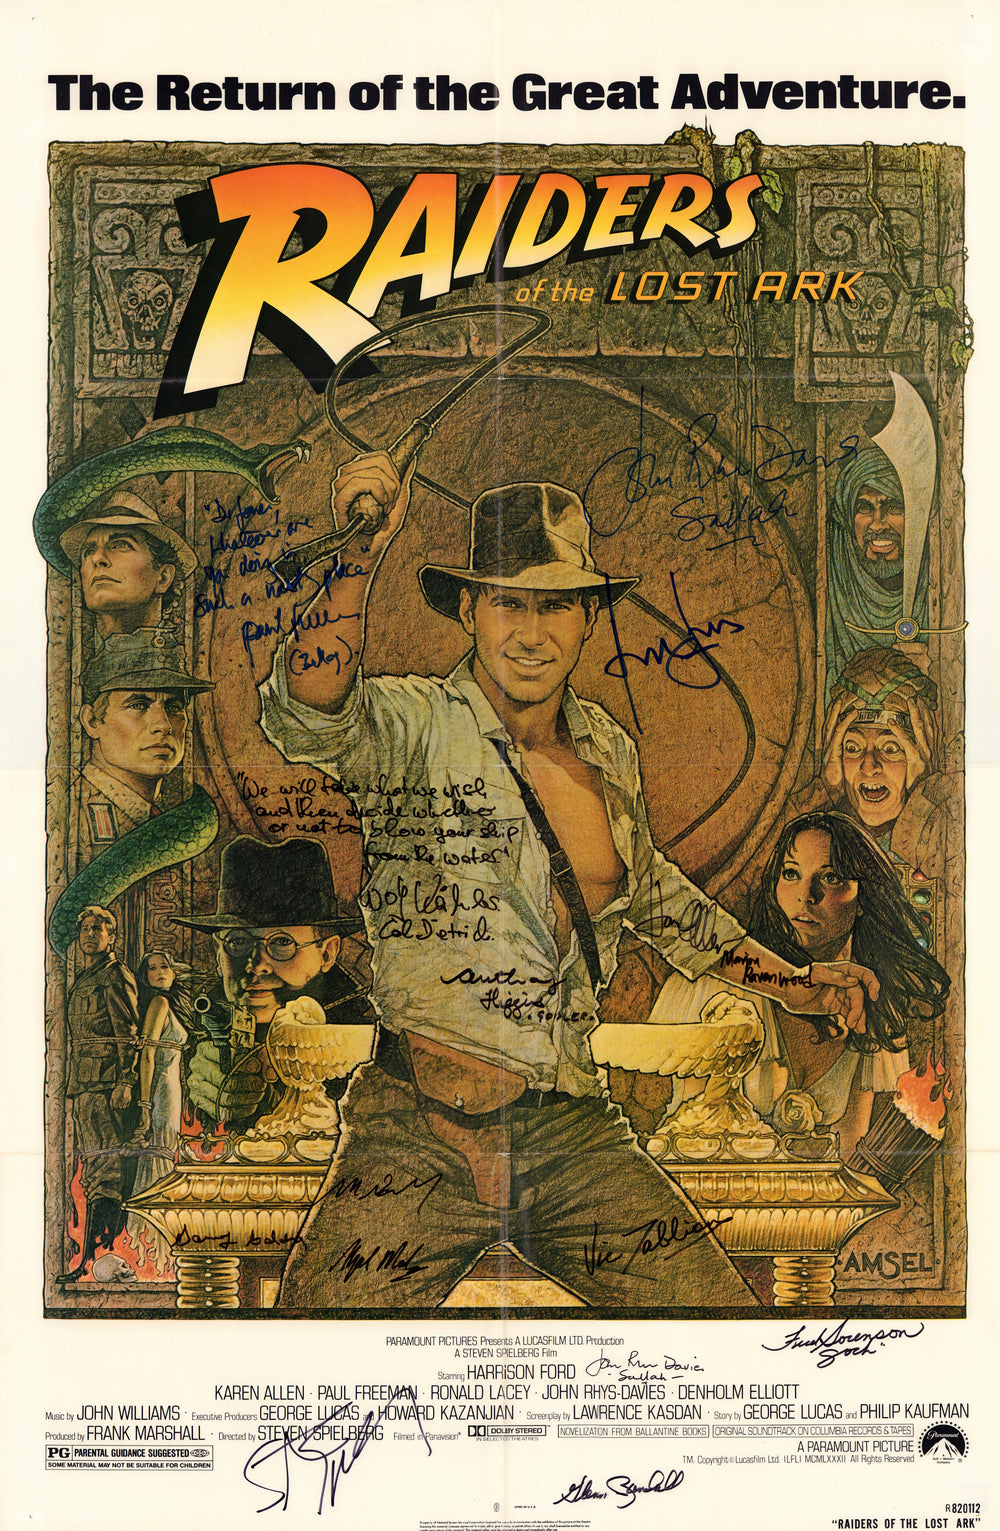 Indiana Jones and the Raiders of the Lost Ark 27x41 Poster Cast Signed by Harrison Ford, Steven Spielberg, Karen Allen, Paul Freeman, John Rhys-Davies, Alfred Molina, & More